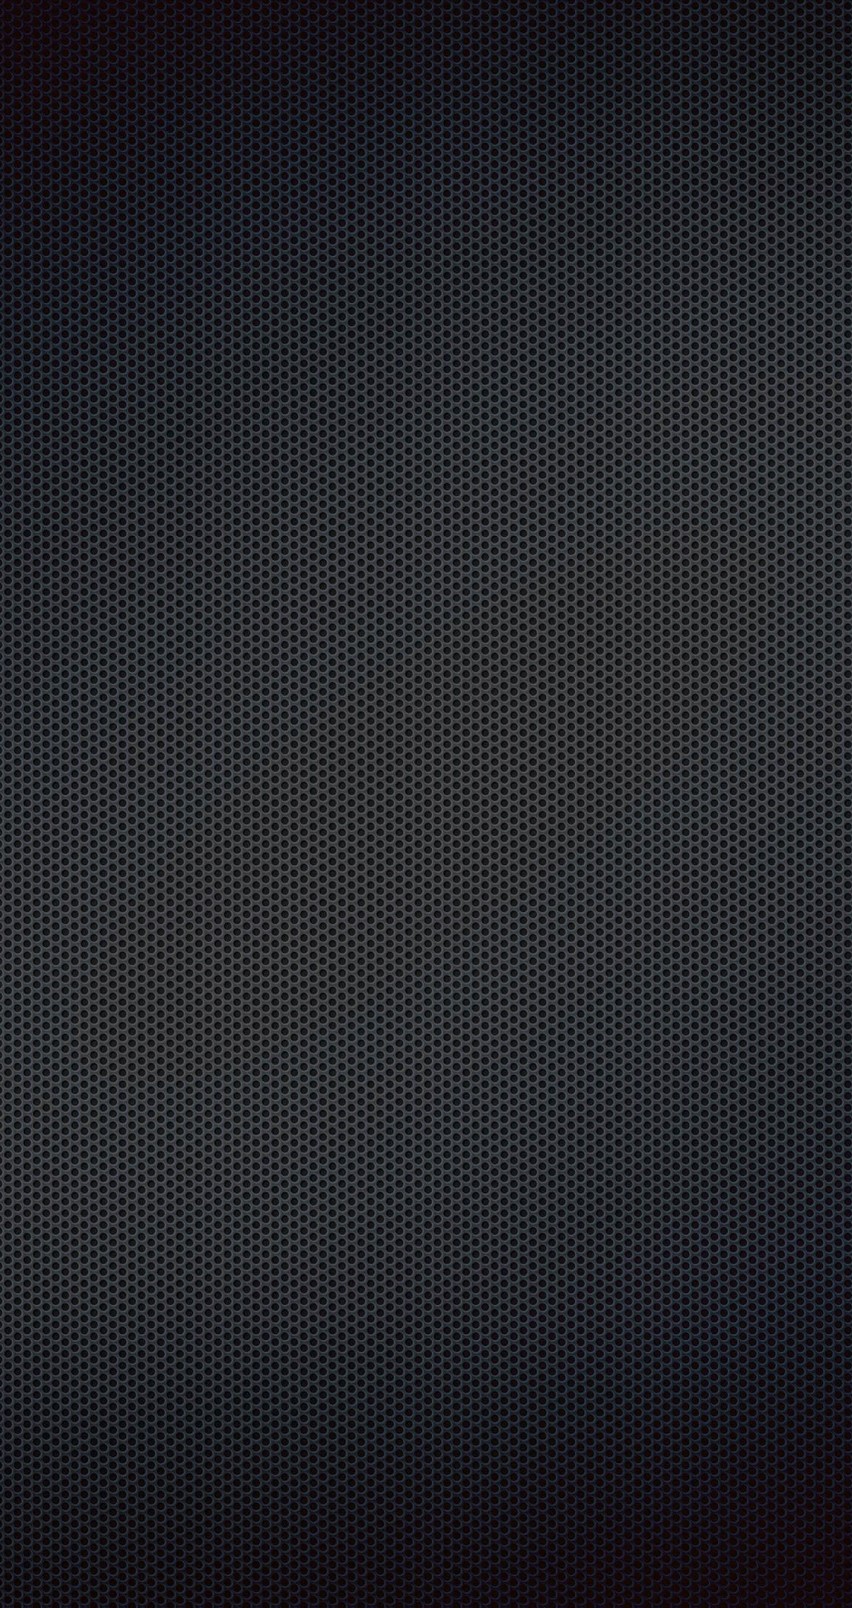 Black Grill Texture Wallpaper for Apple iPhone 6 / 6s